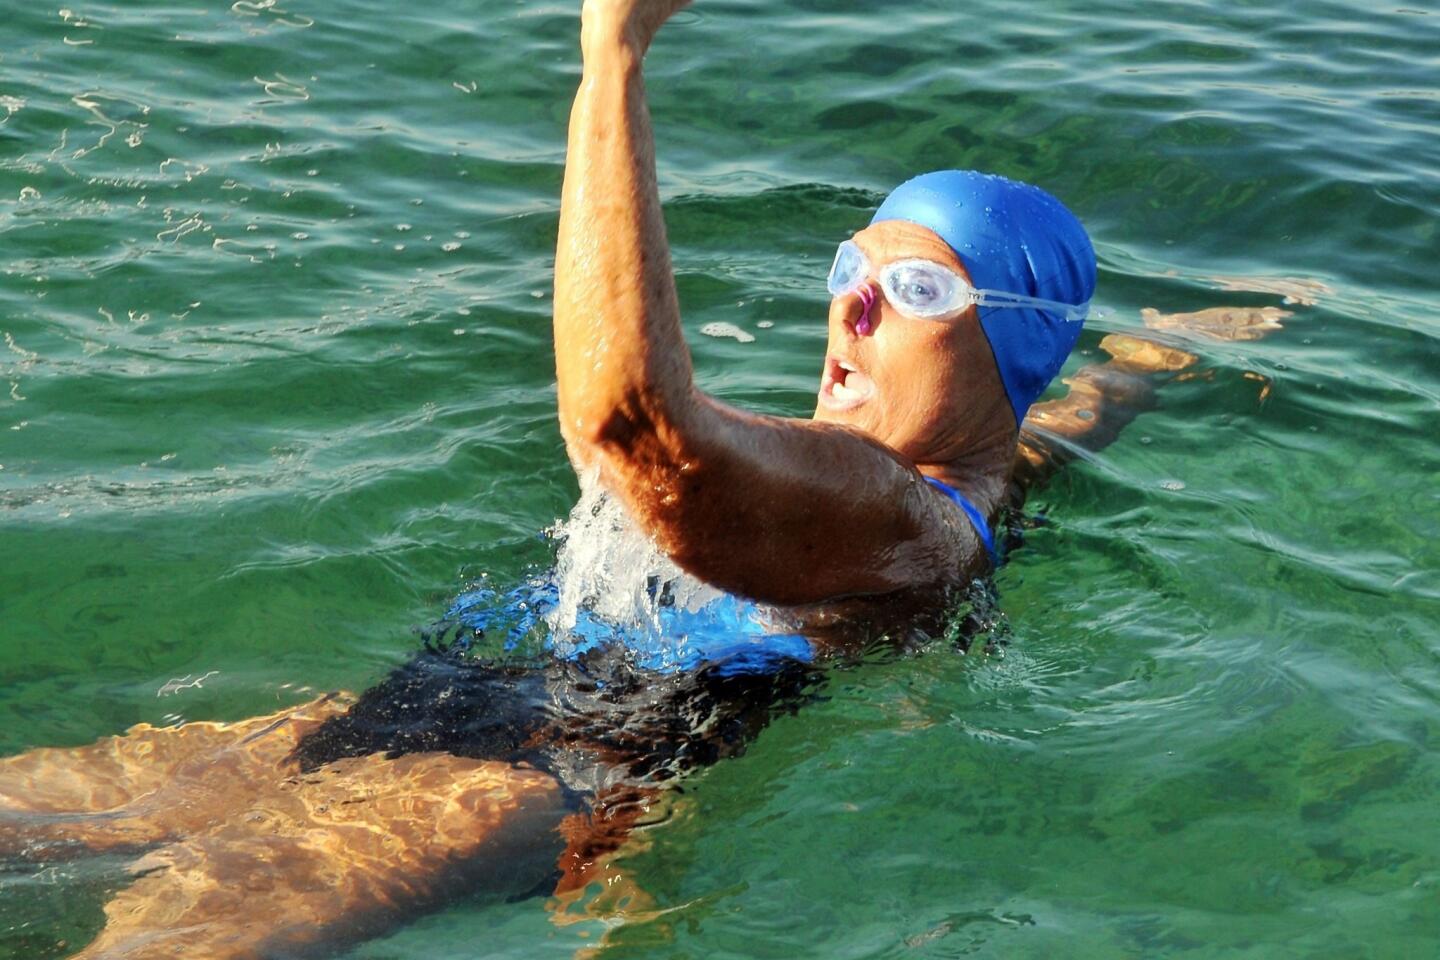 US: 64-year-old Diana Nyad sets record with 177-km Cuba-to